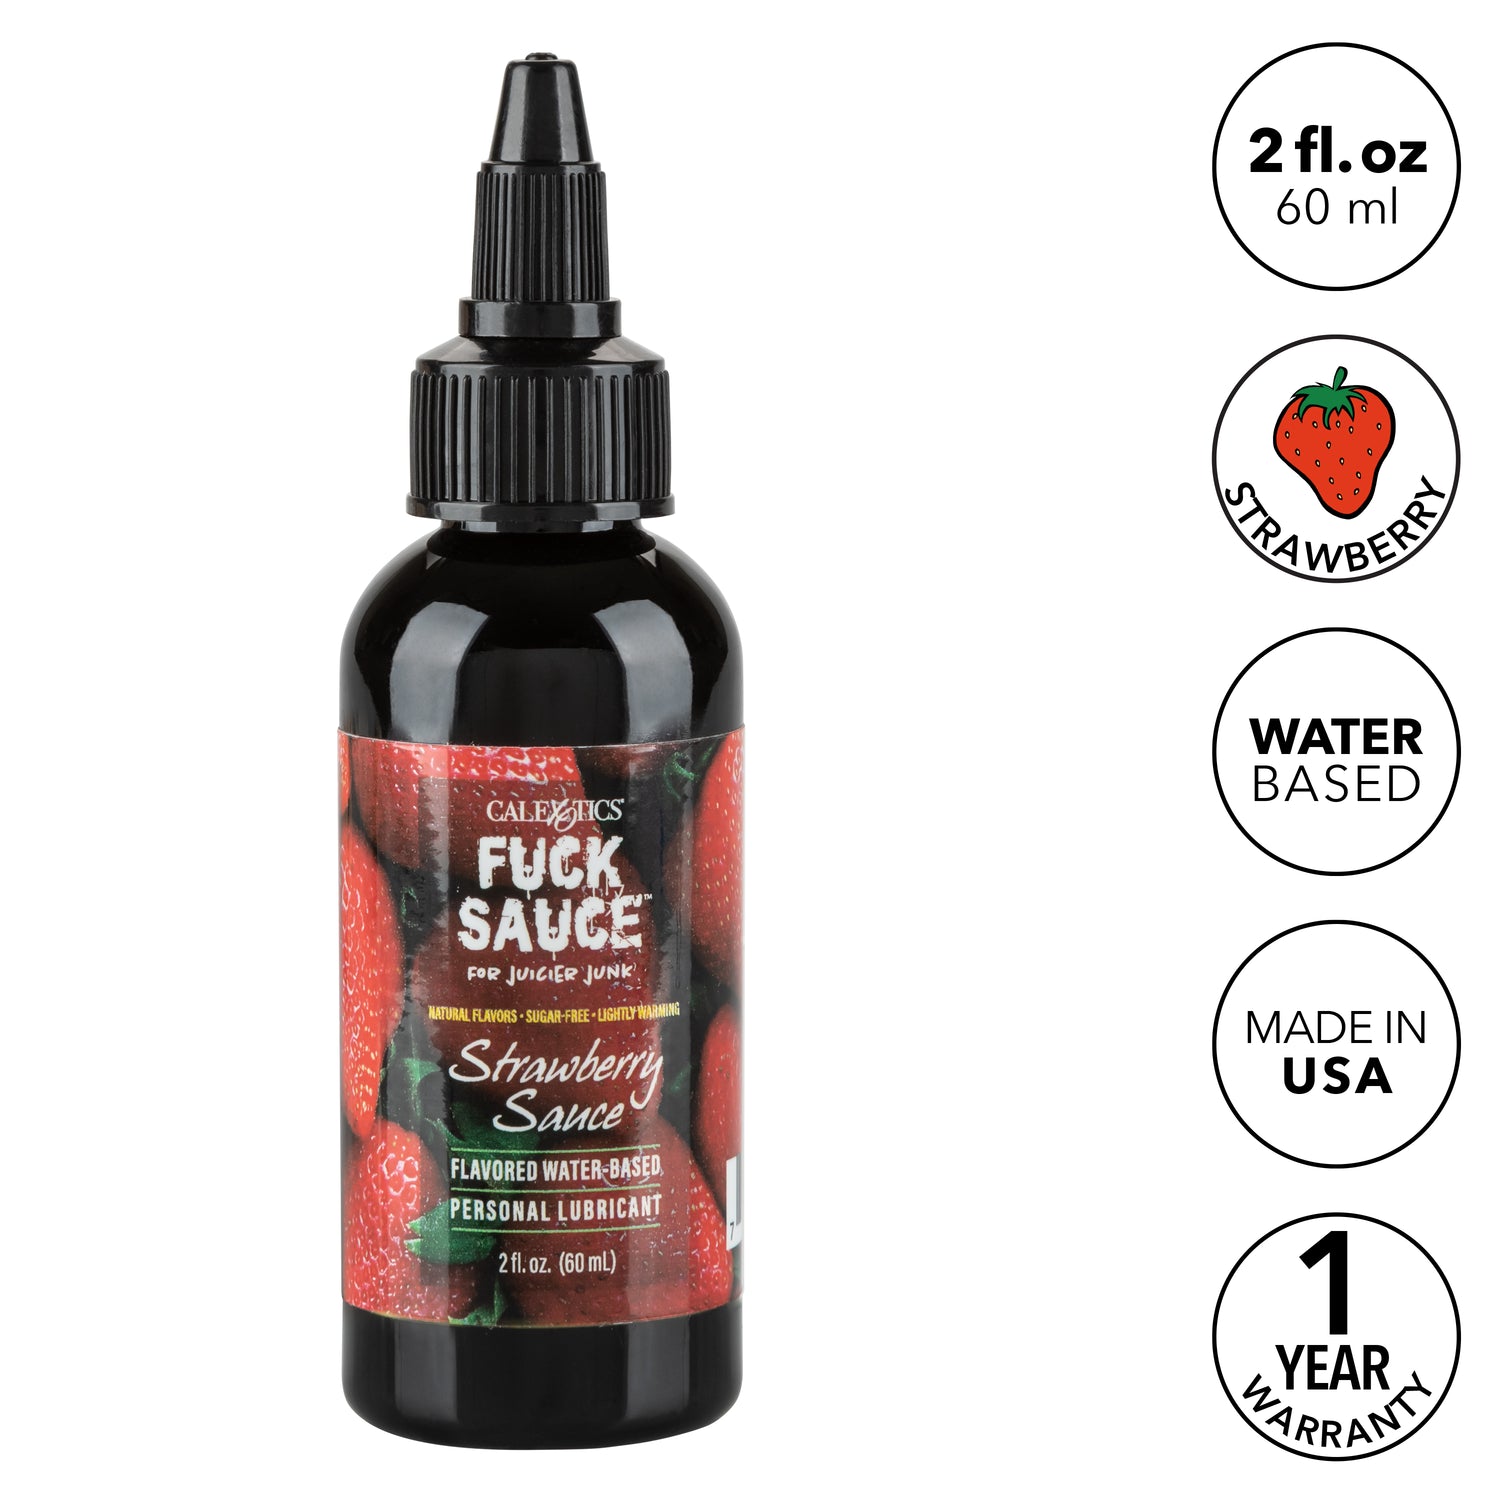 F* SAUCE Flavored Water-Based Personal Lubricant - Strawberry 2 fl. oz.